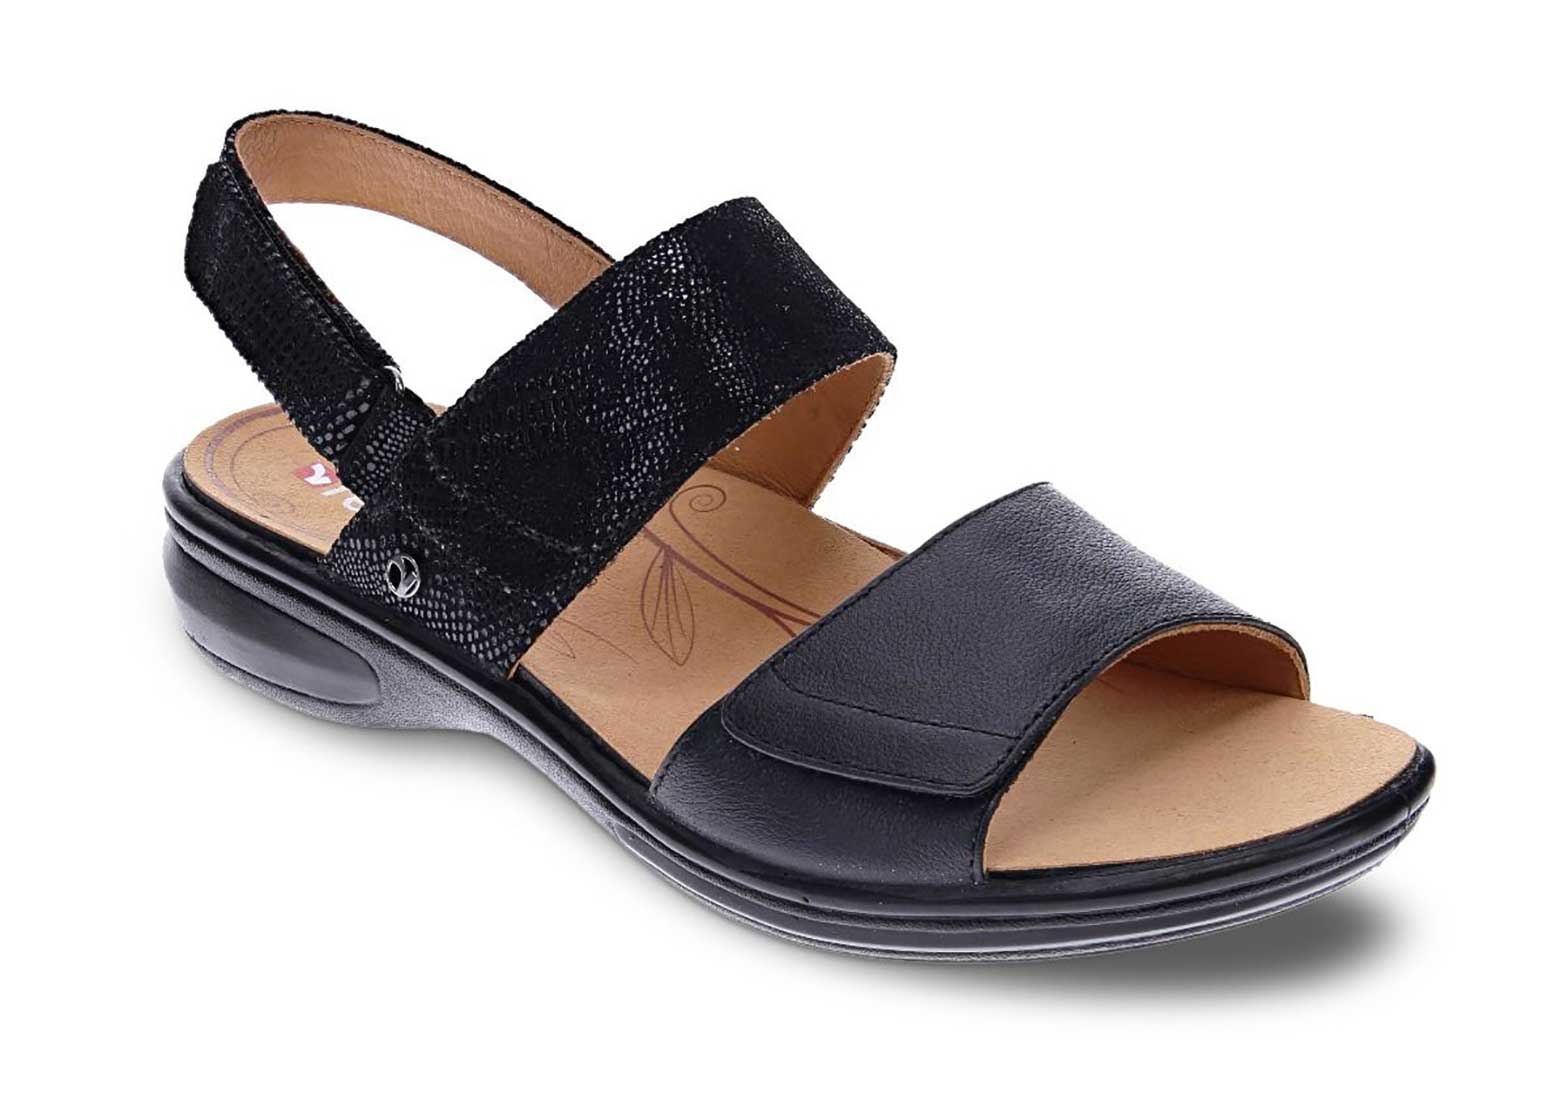 Revere Como: Sandal with Removable Foot 